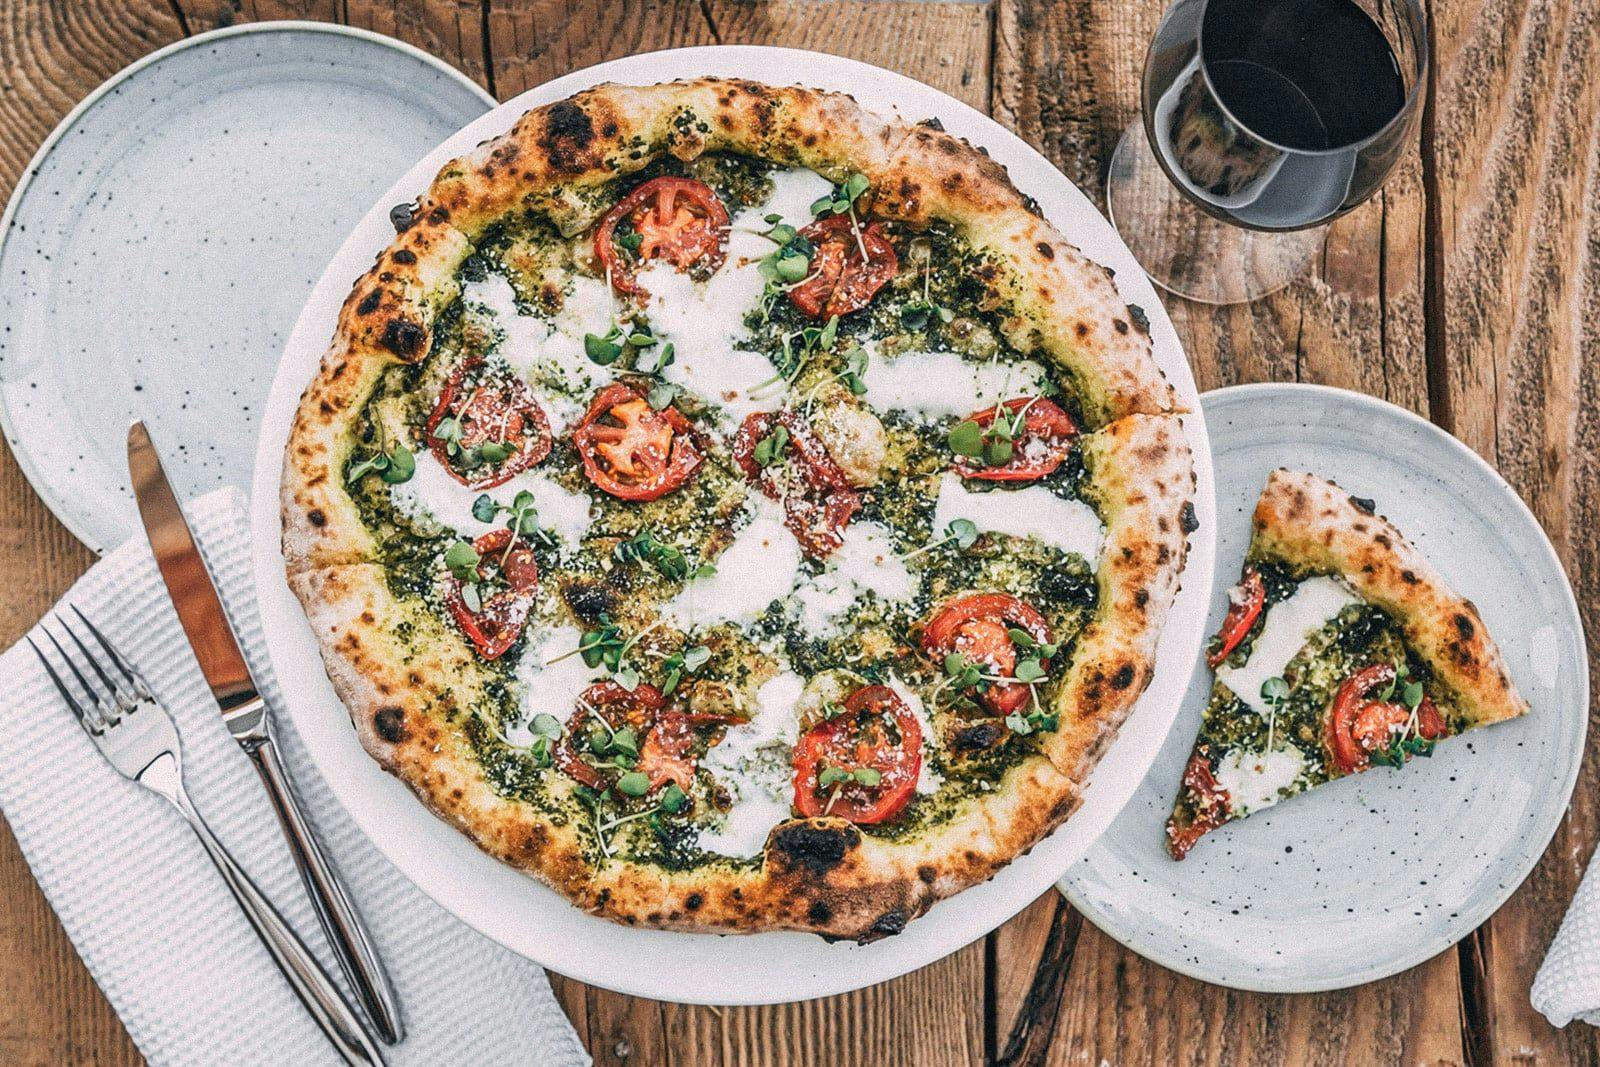 A very vibrant margherita pizza paired with a glass of red wine